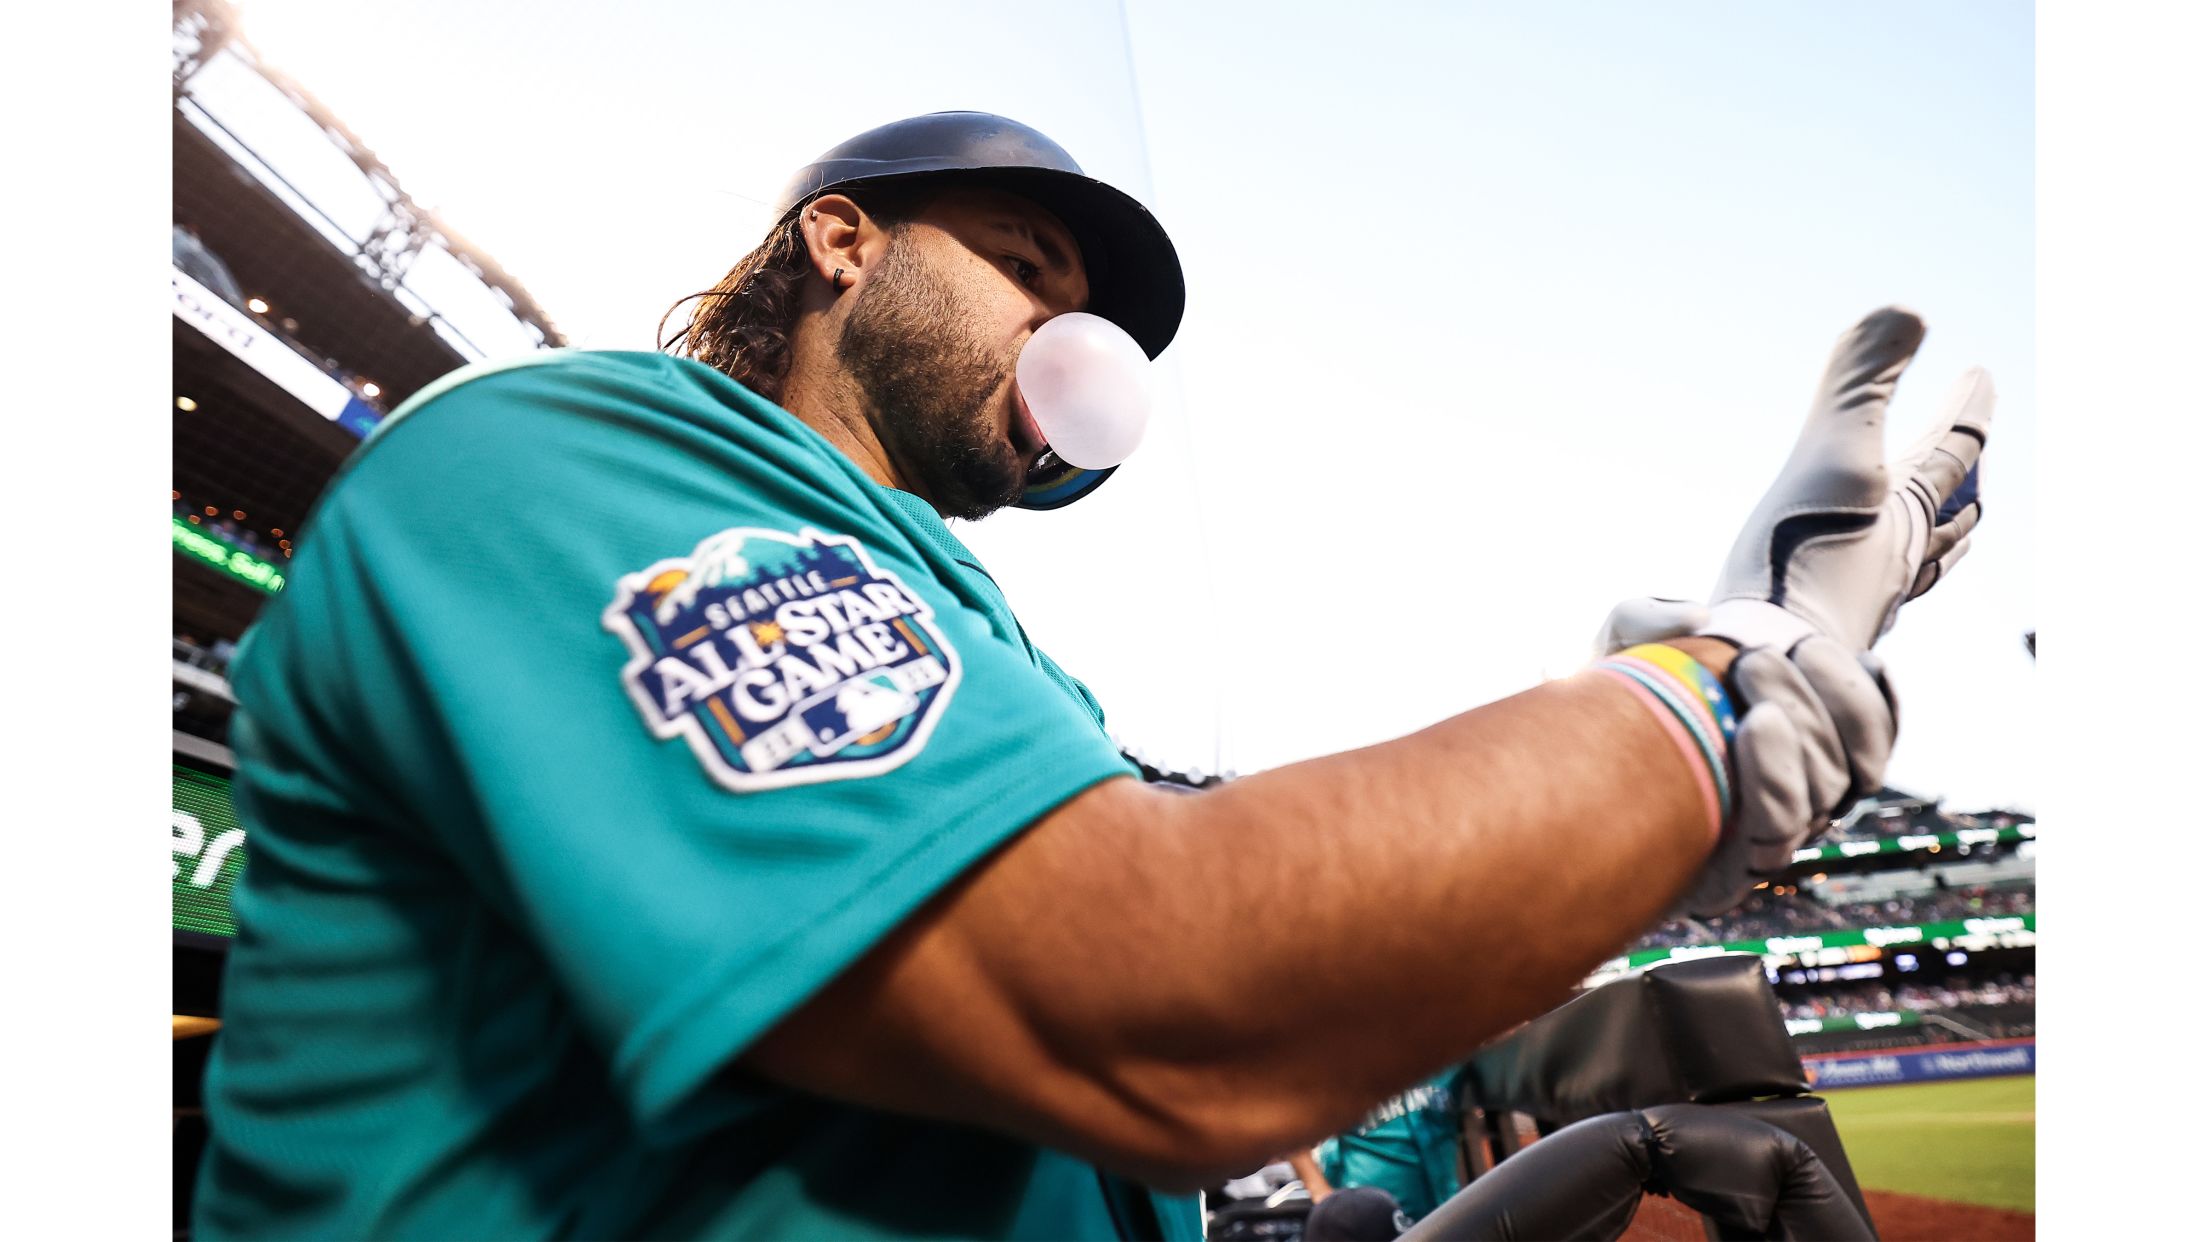 Jim Moore: Seattle Mariners making the 2022 playoffs look realistic